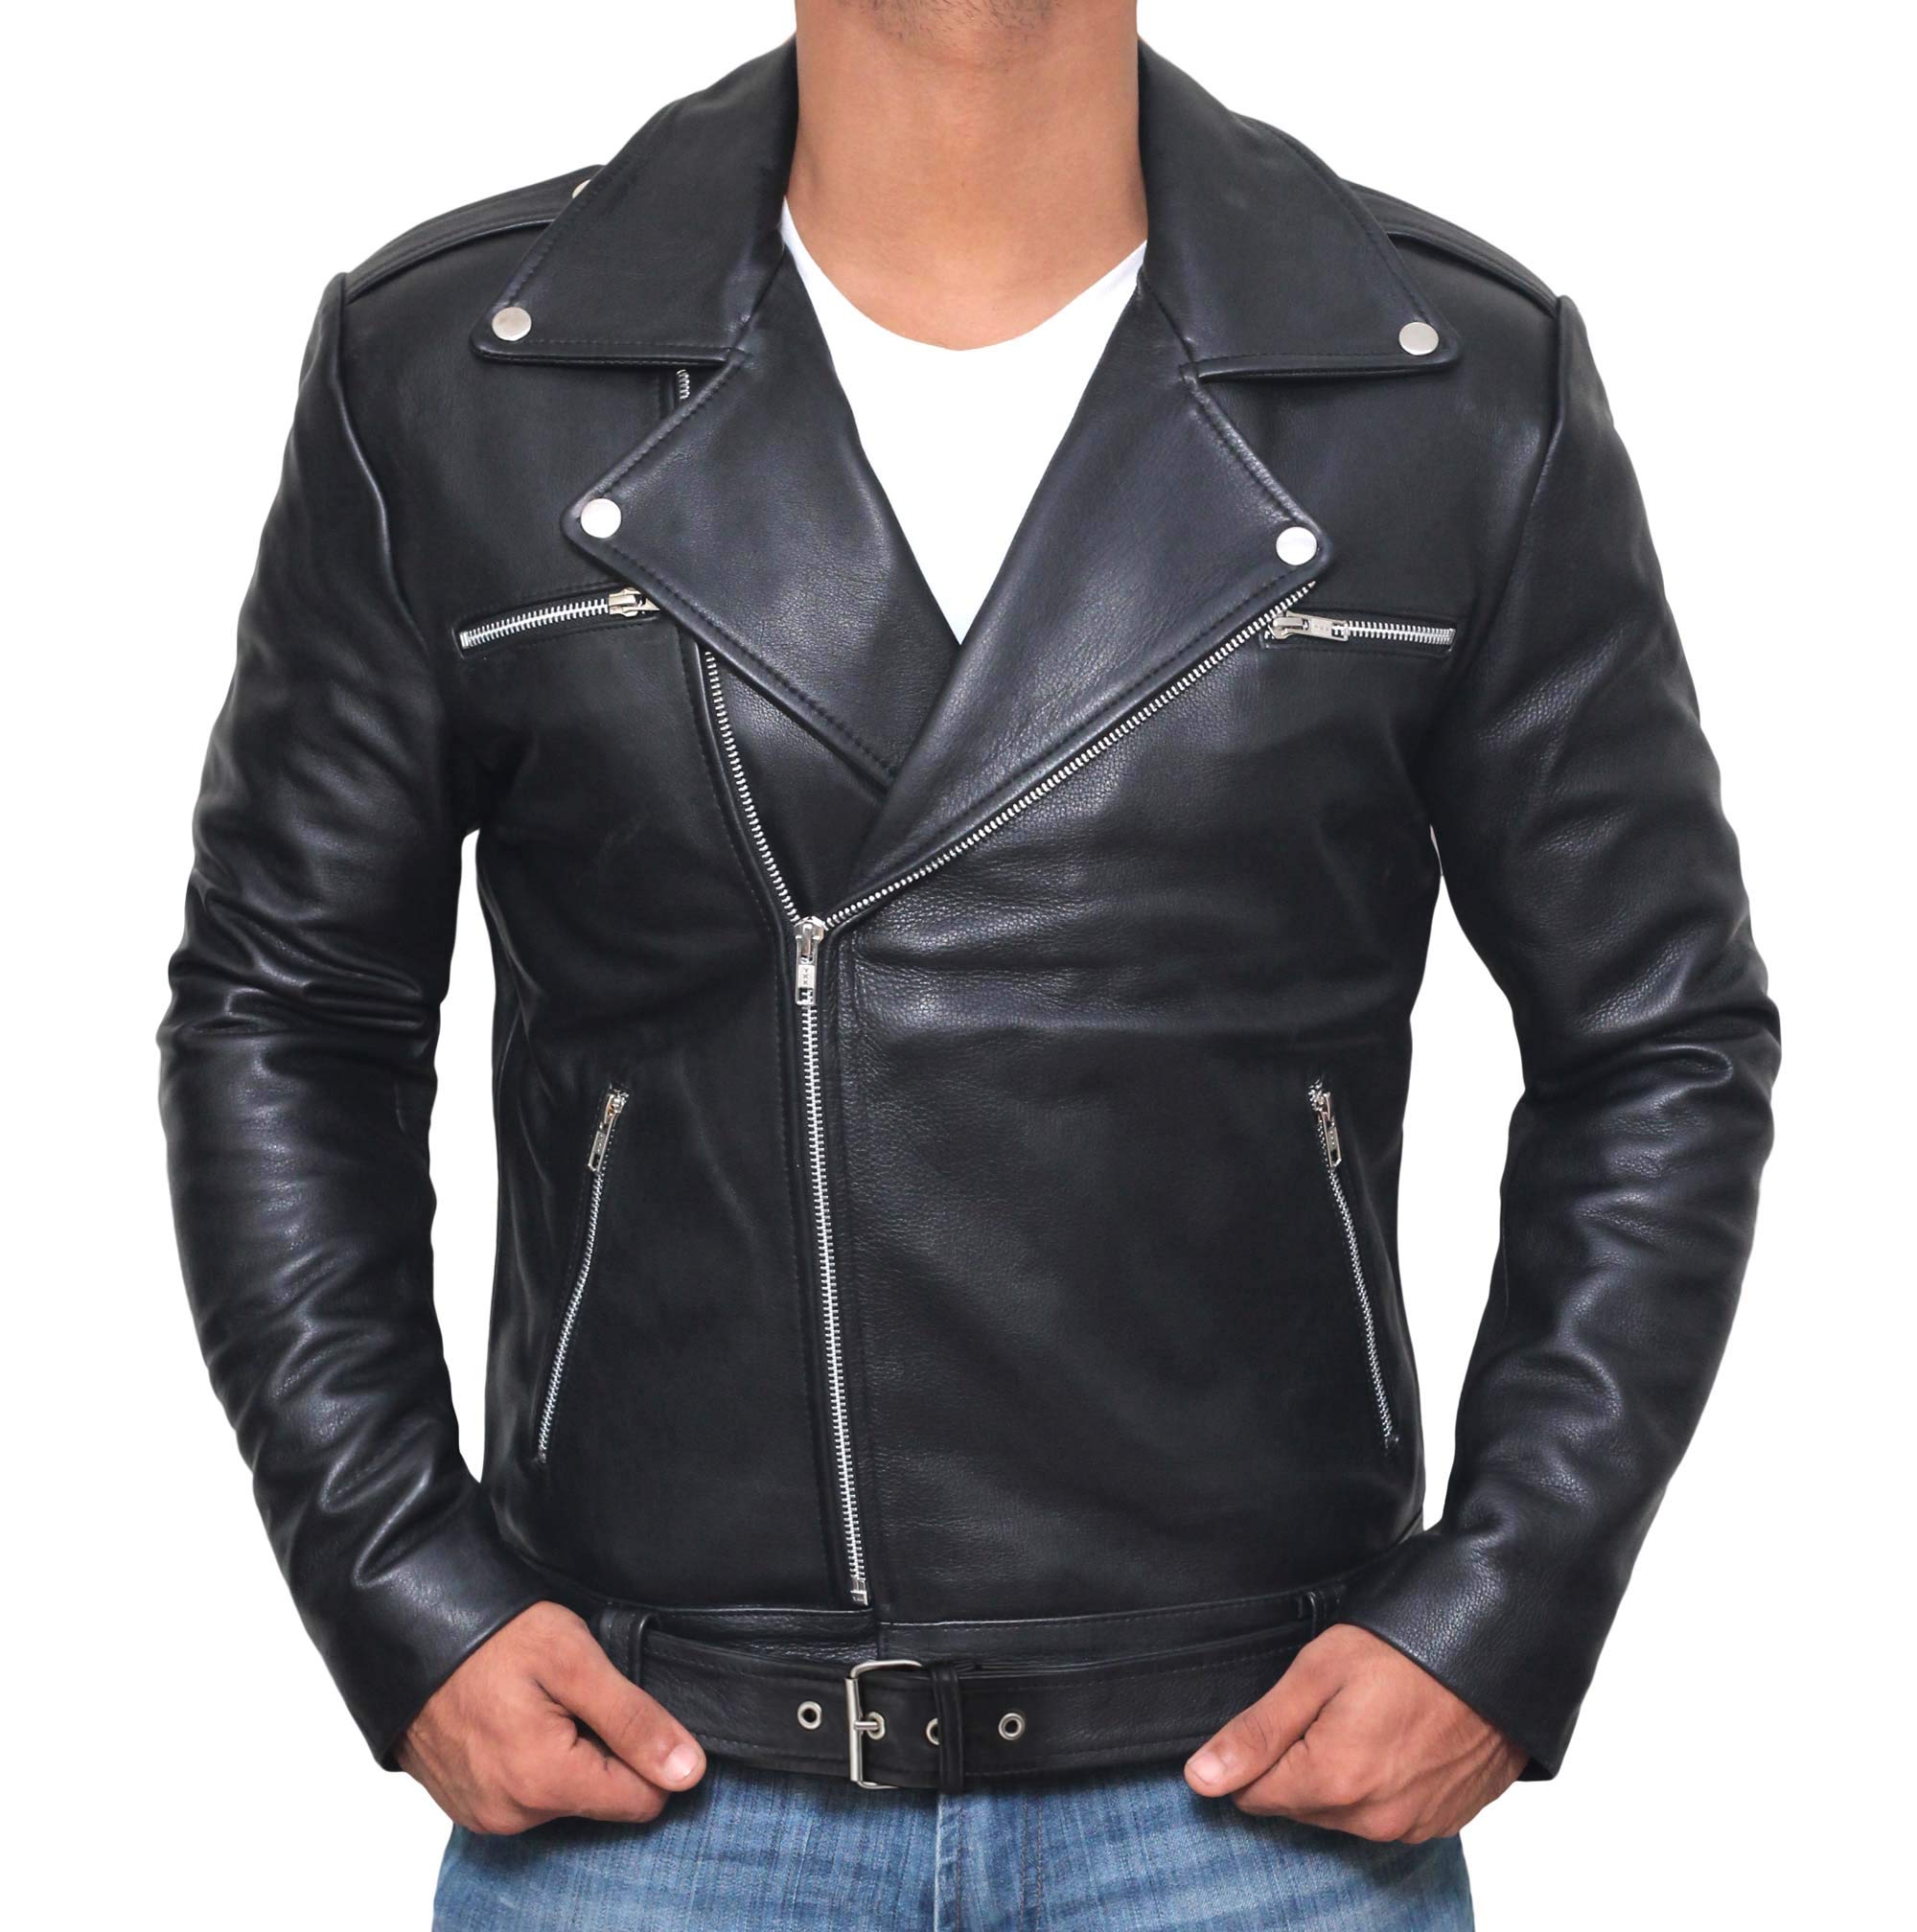 The Best Motorcycle Jackets To Wear Daily| HiConsumption